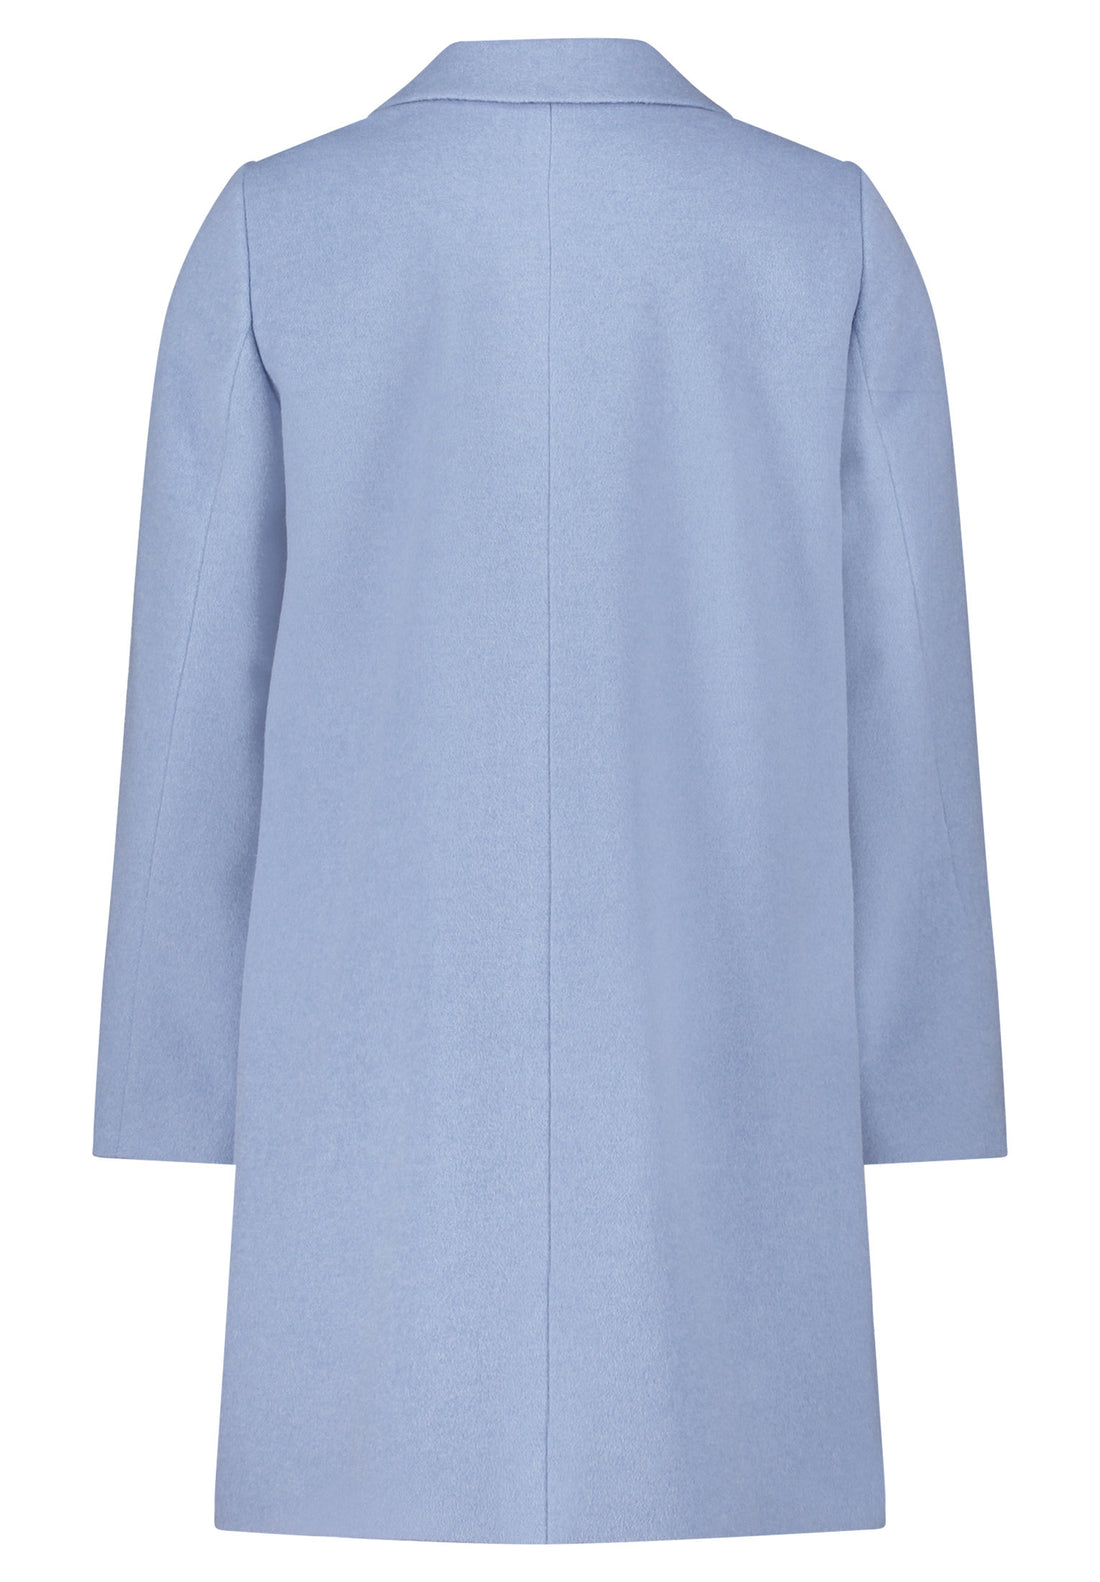 Blue Collared Button Up Coat_7578-2146_8002_02